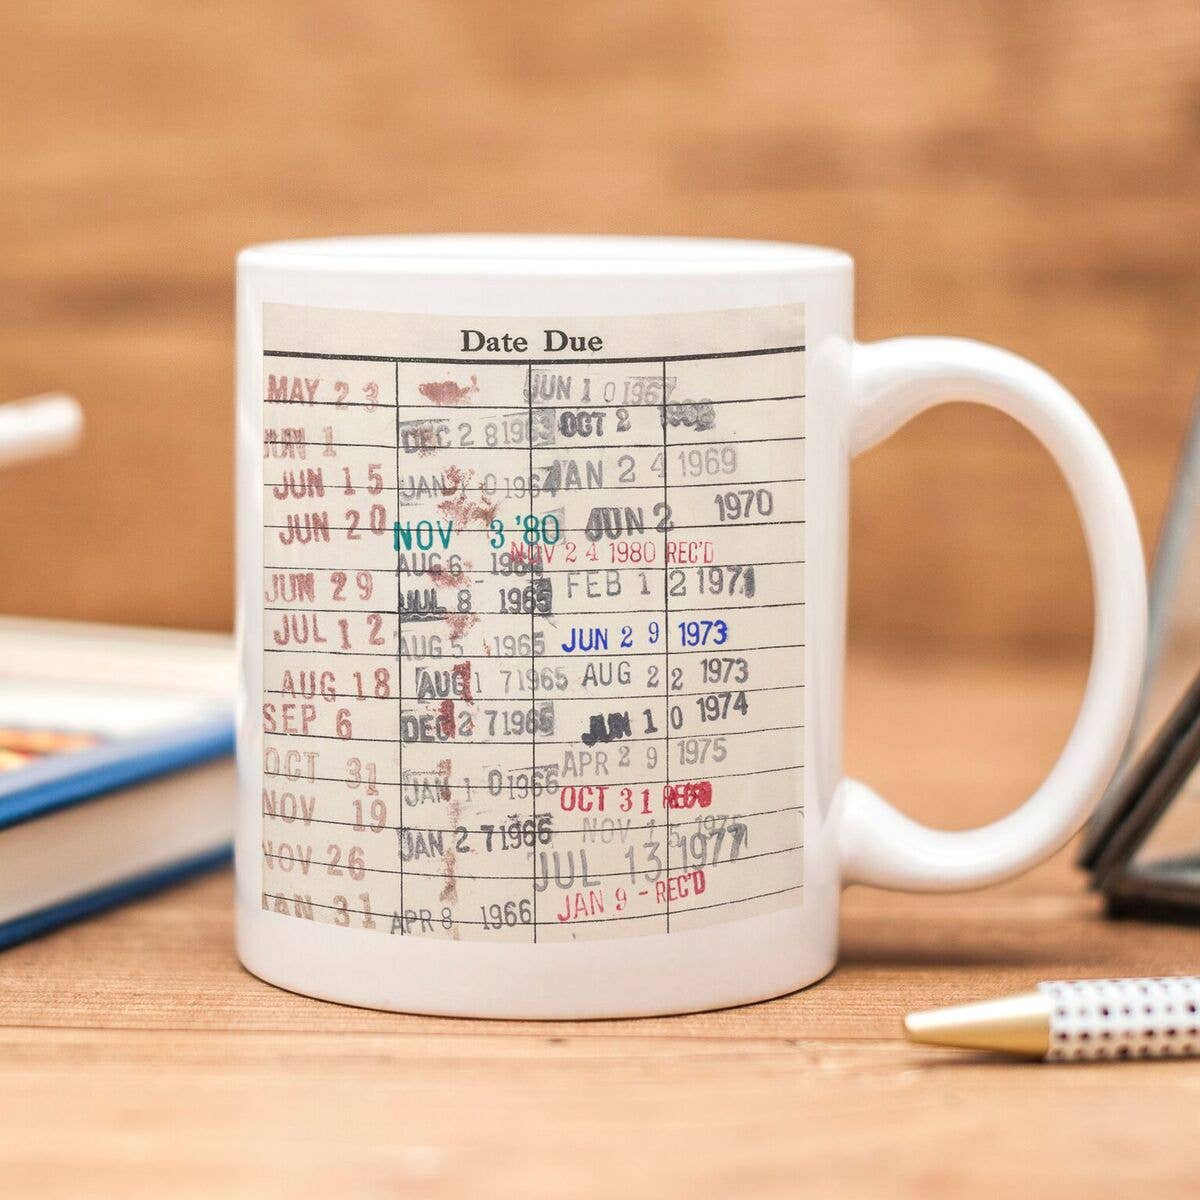 Mug-001: Library Book Due Date